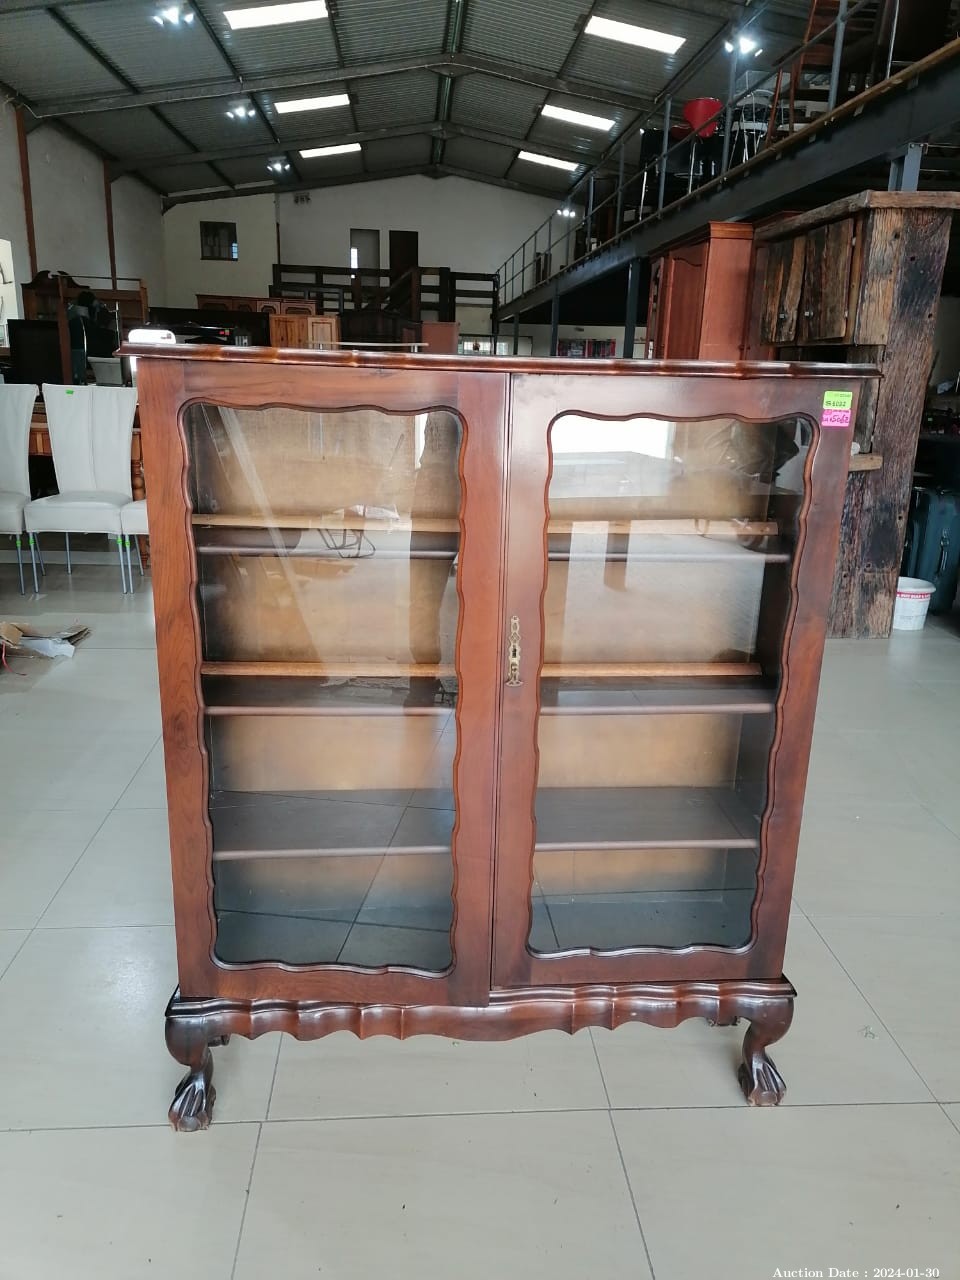 5062 - Solid Wood Display Cabinet with Glass Insert in the Doors and Ball and Claw Feet